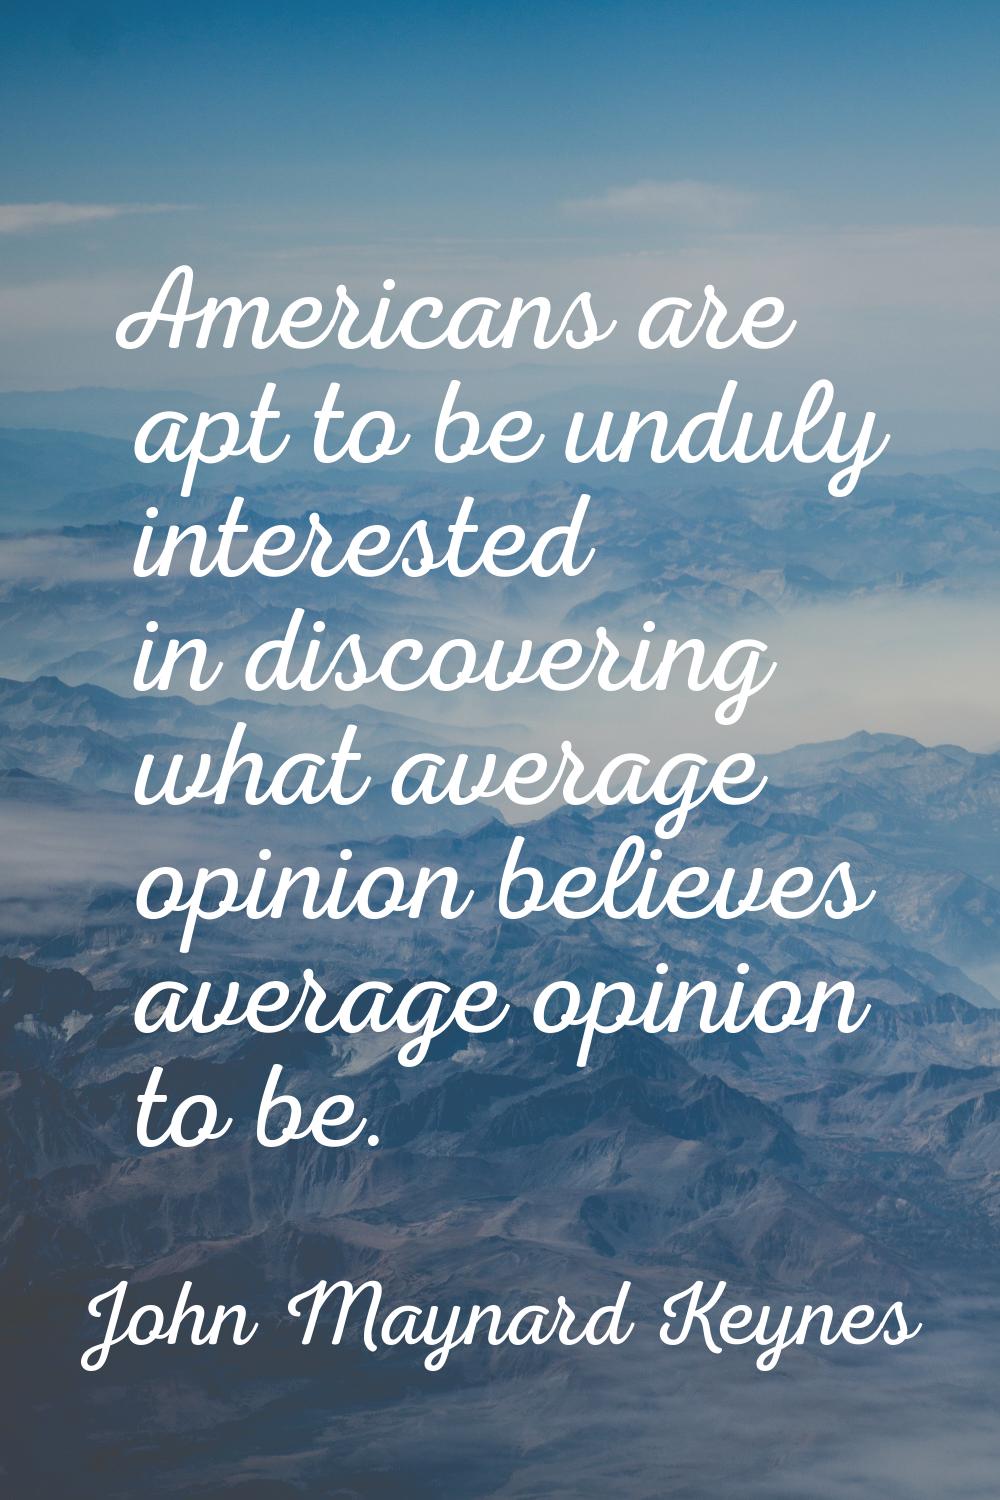 Americans are apt to be unduly interested in discovering what average opinion believes average opin